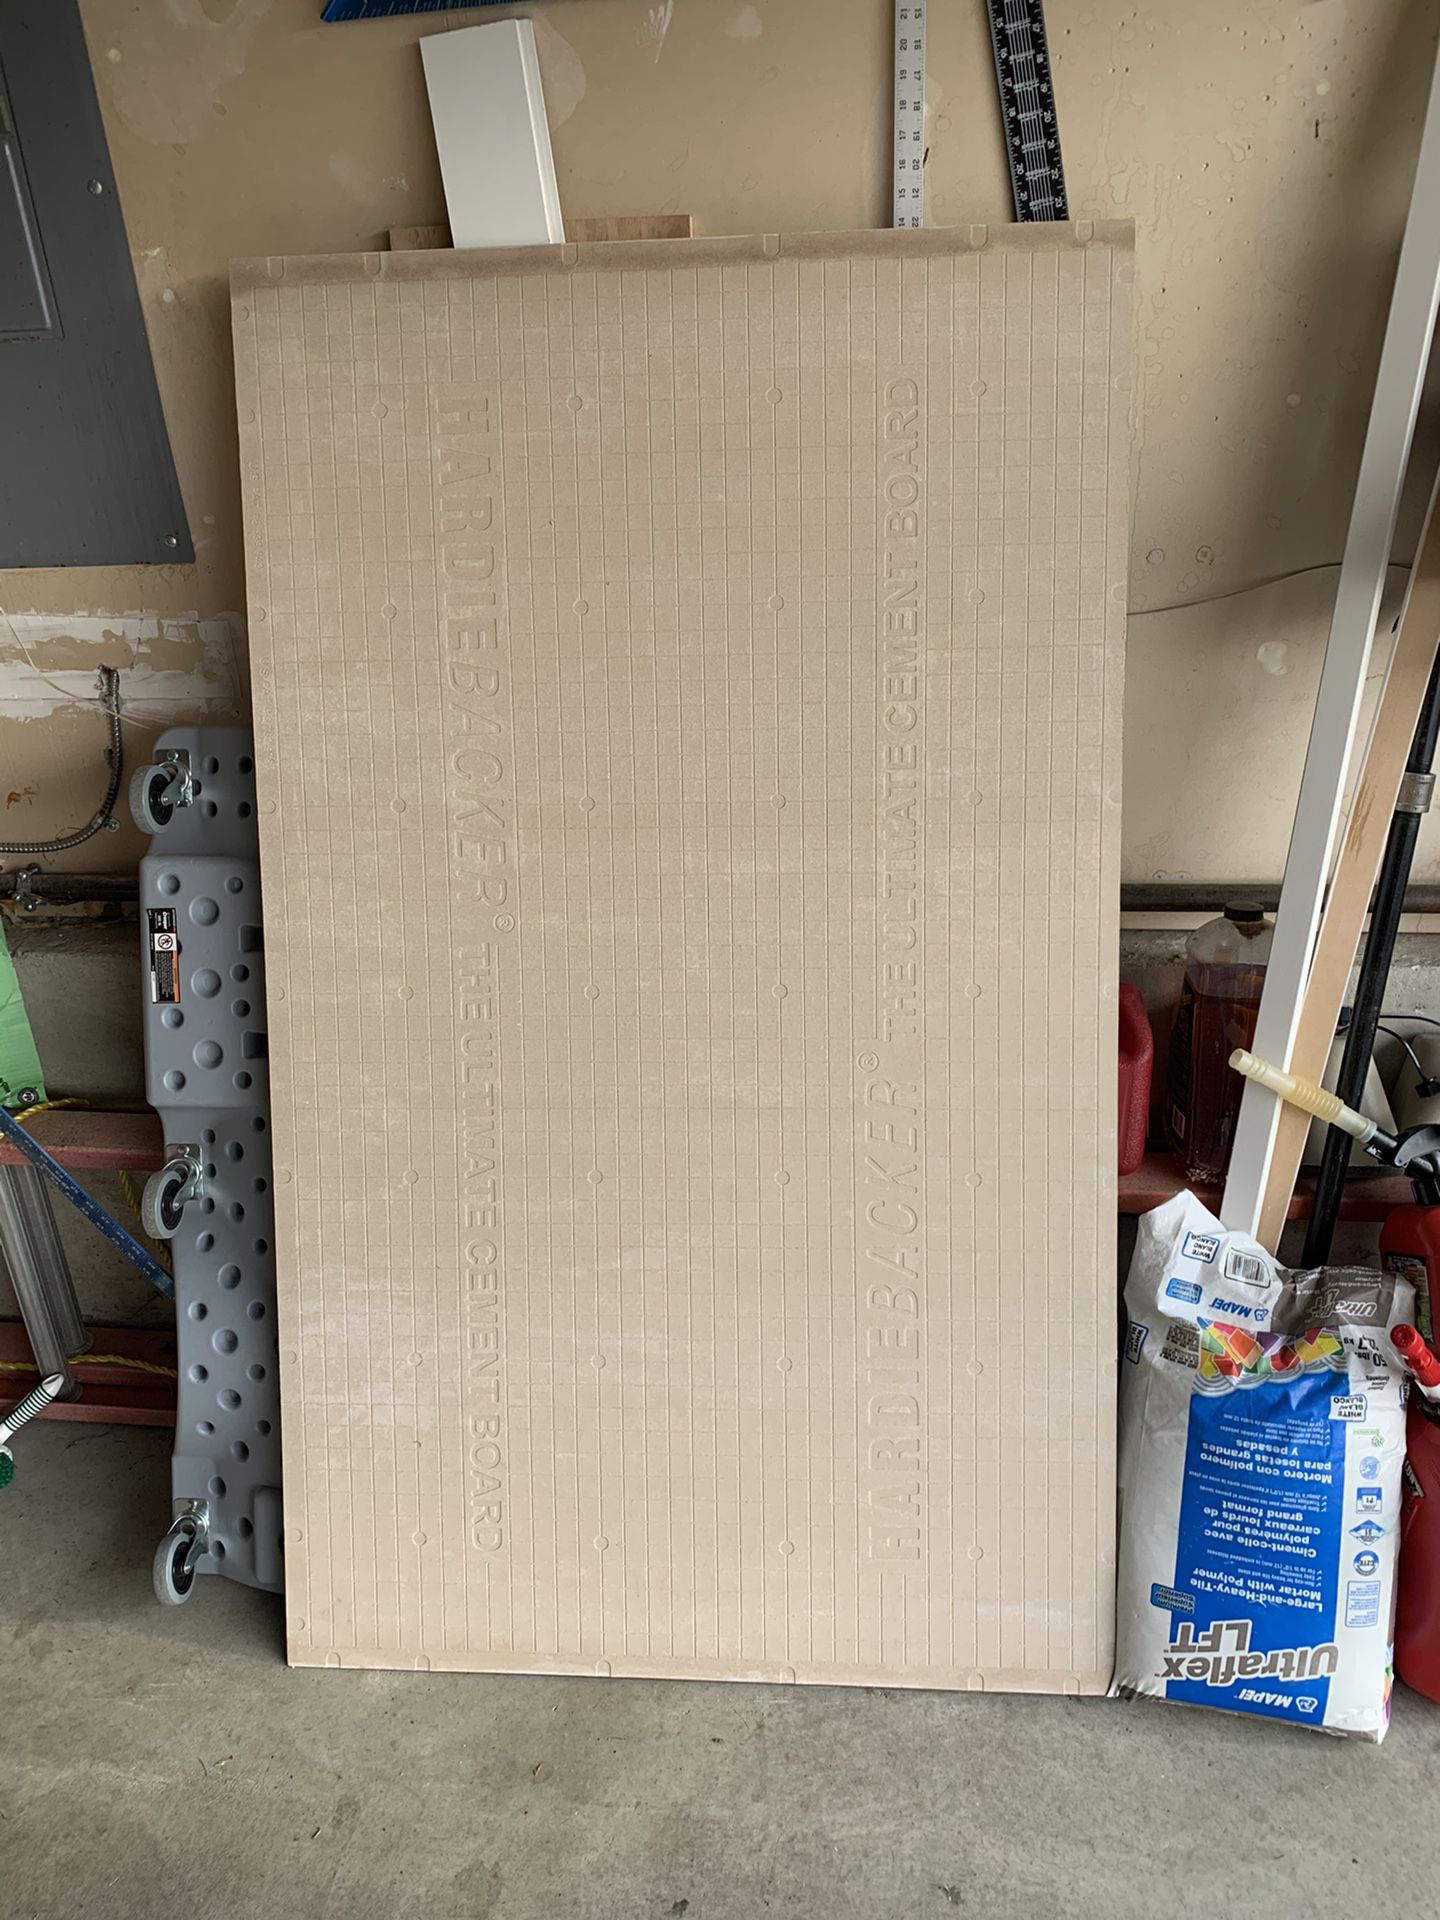 Free concrete board and bag of mortar